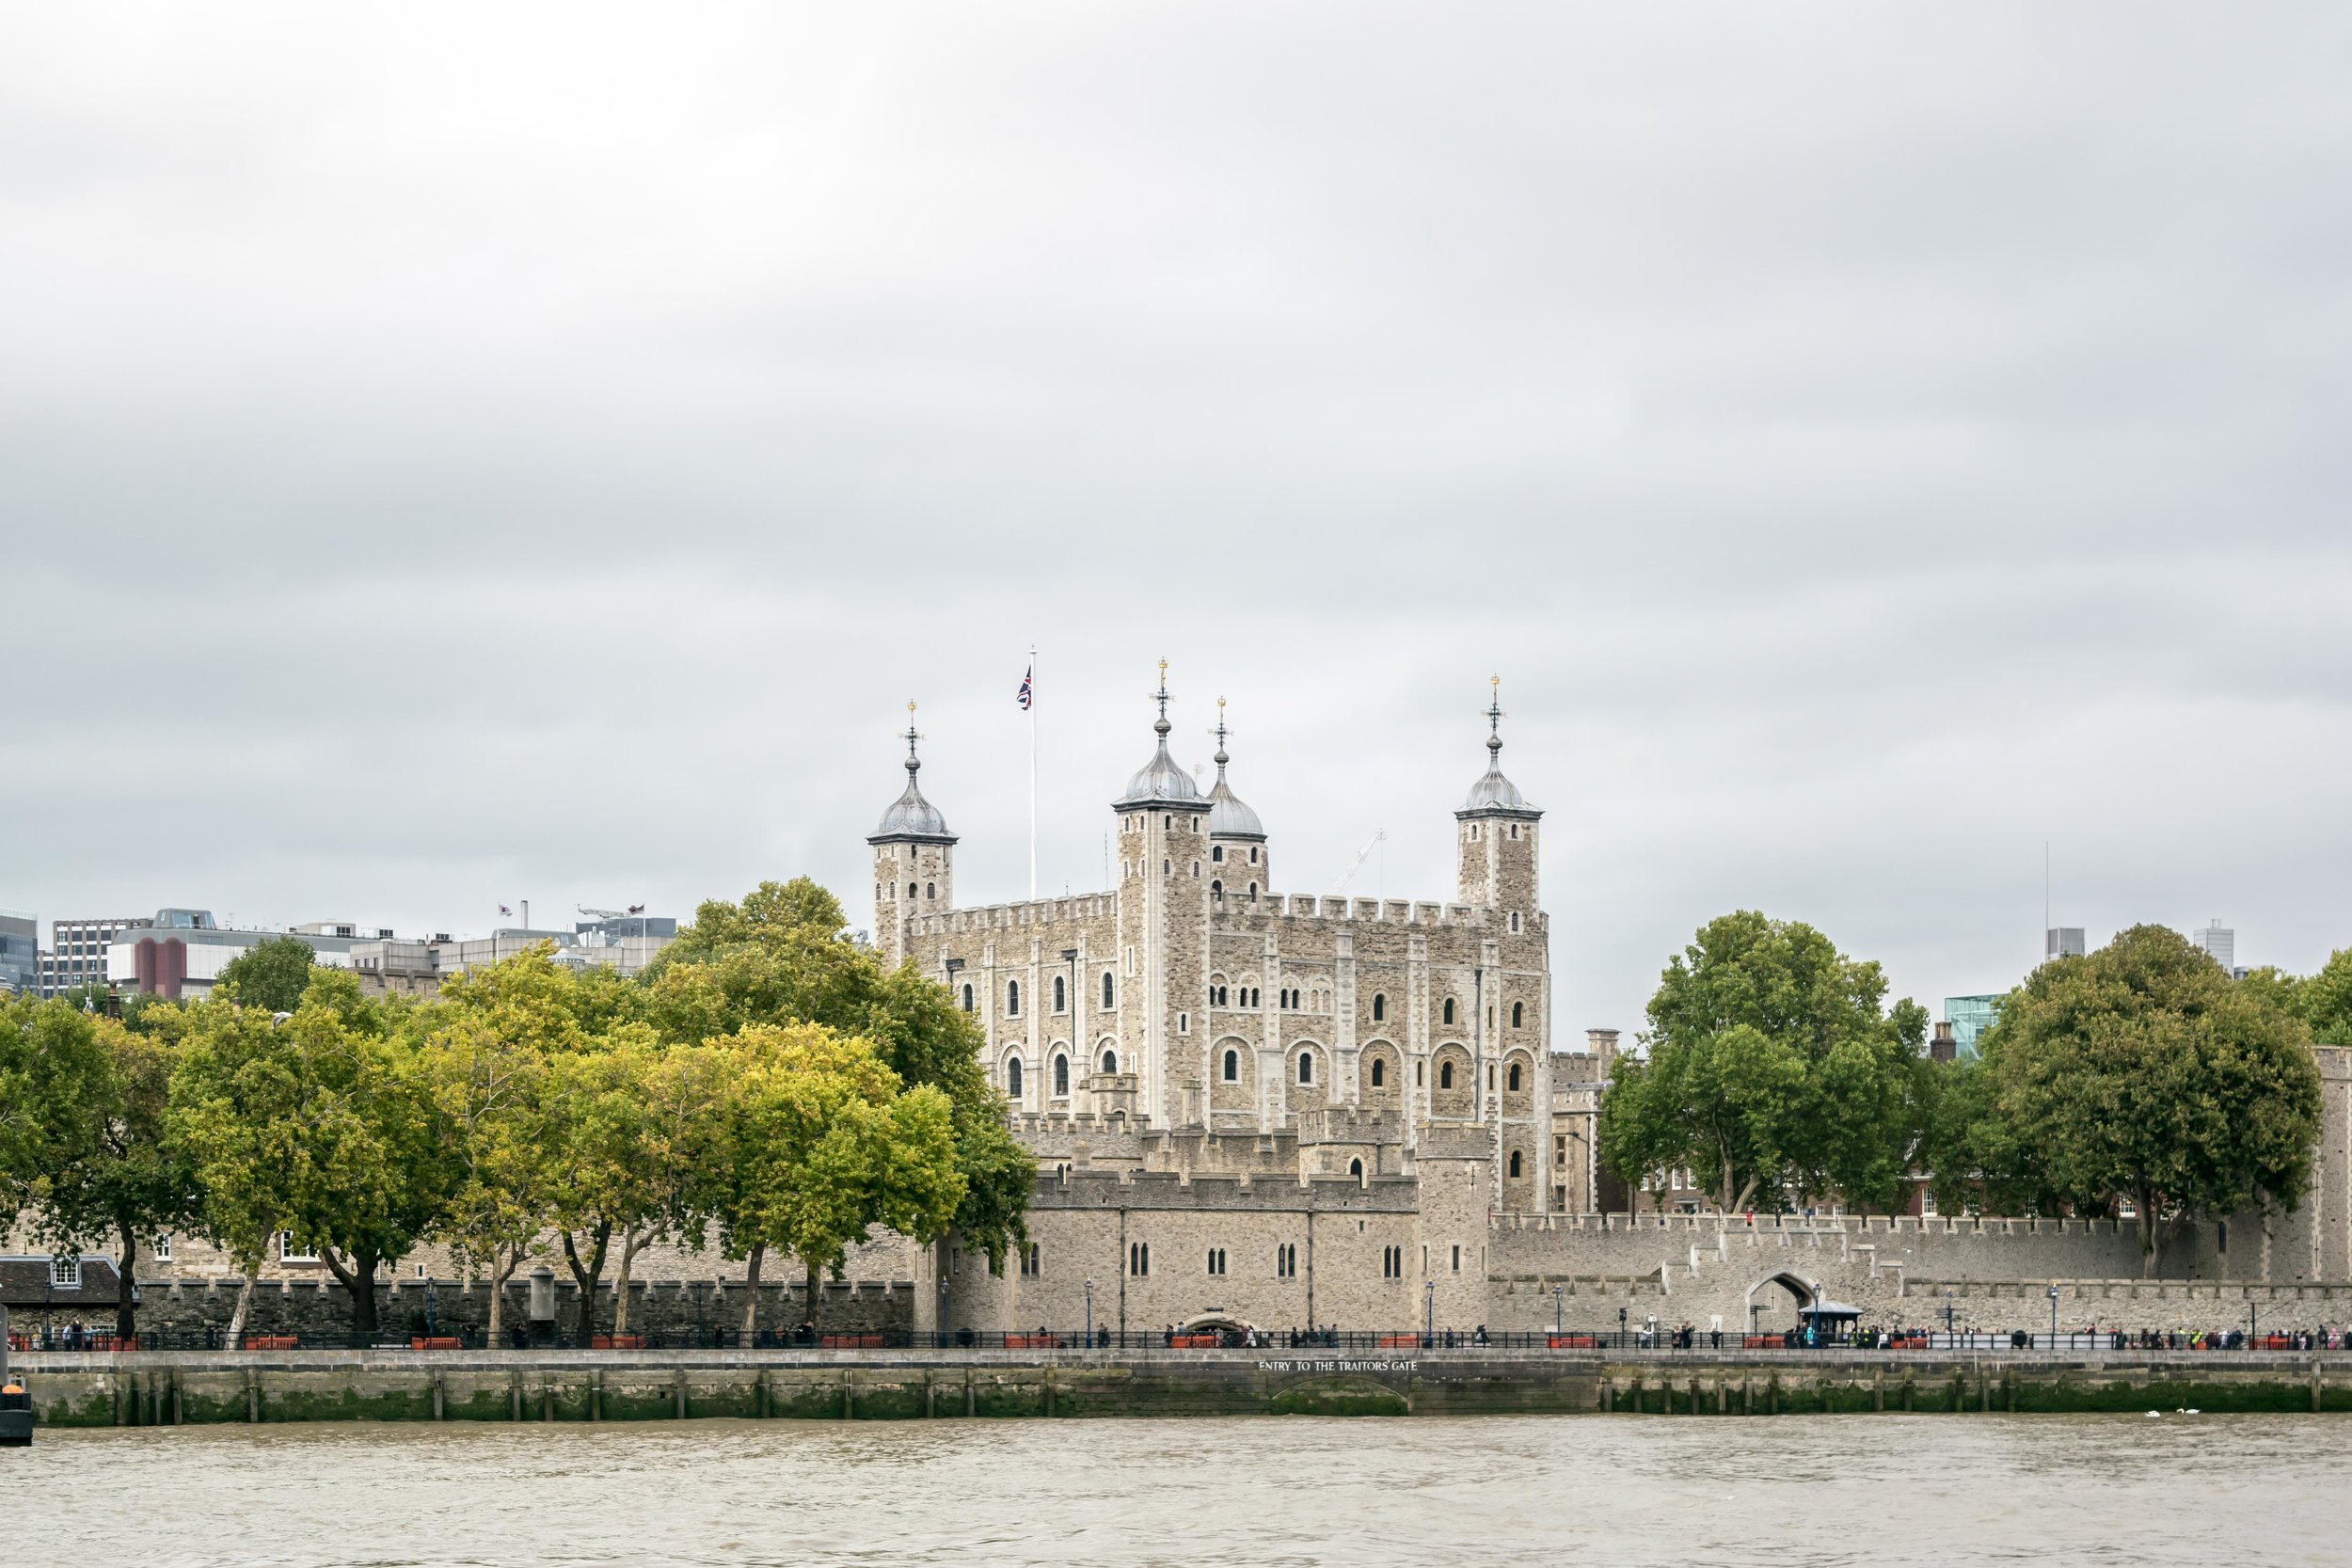 8 Valuable Pieces of Advice For Visiting the Tower of London